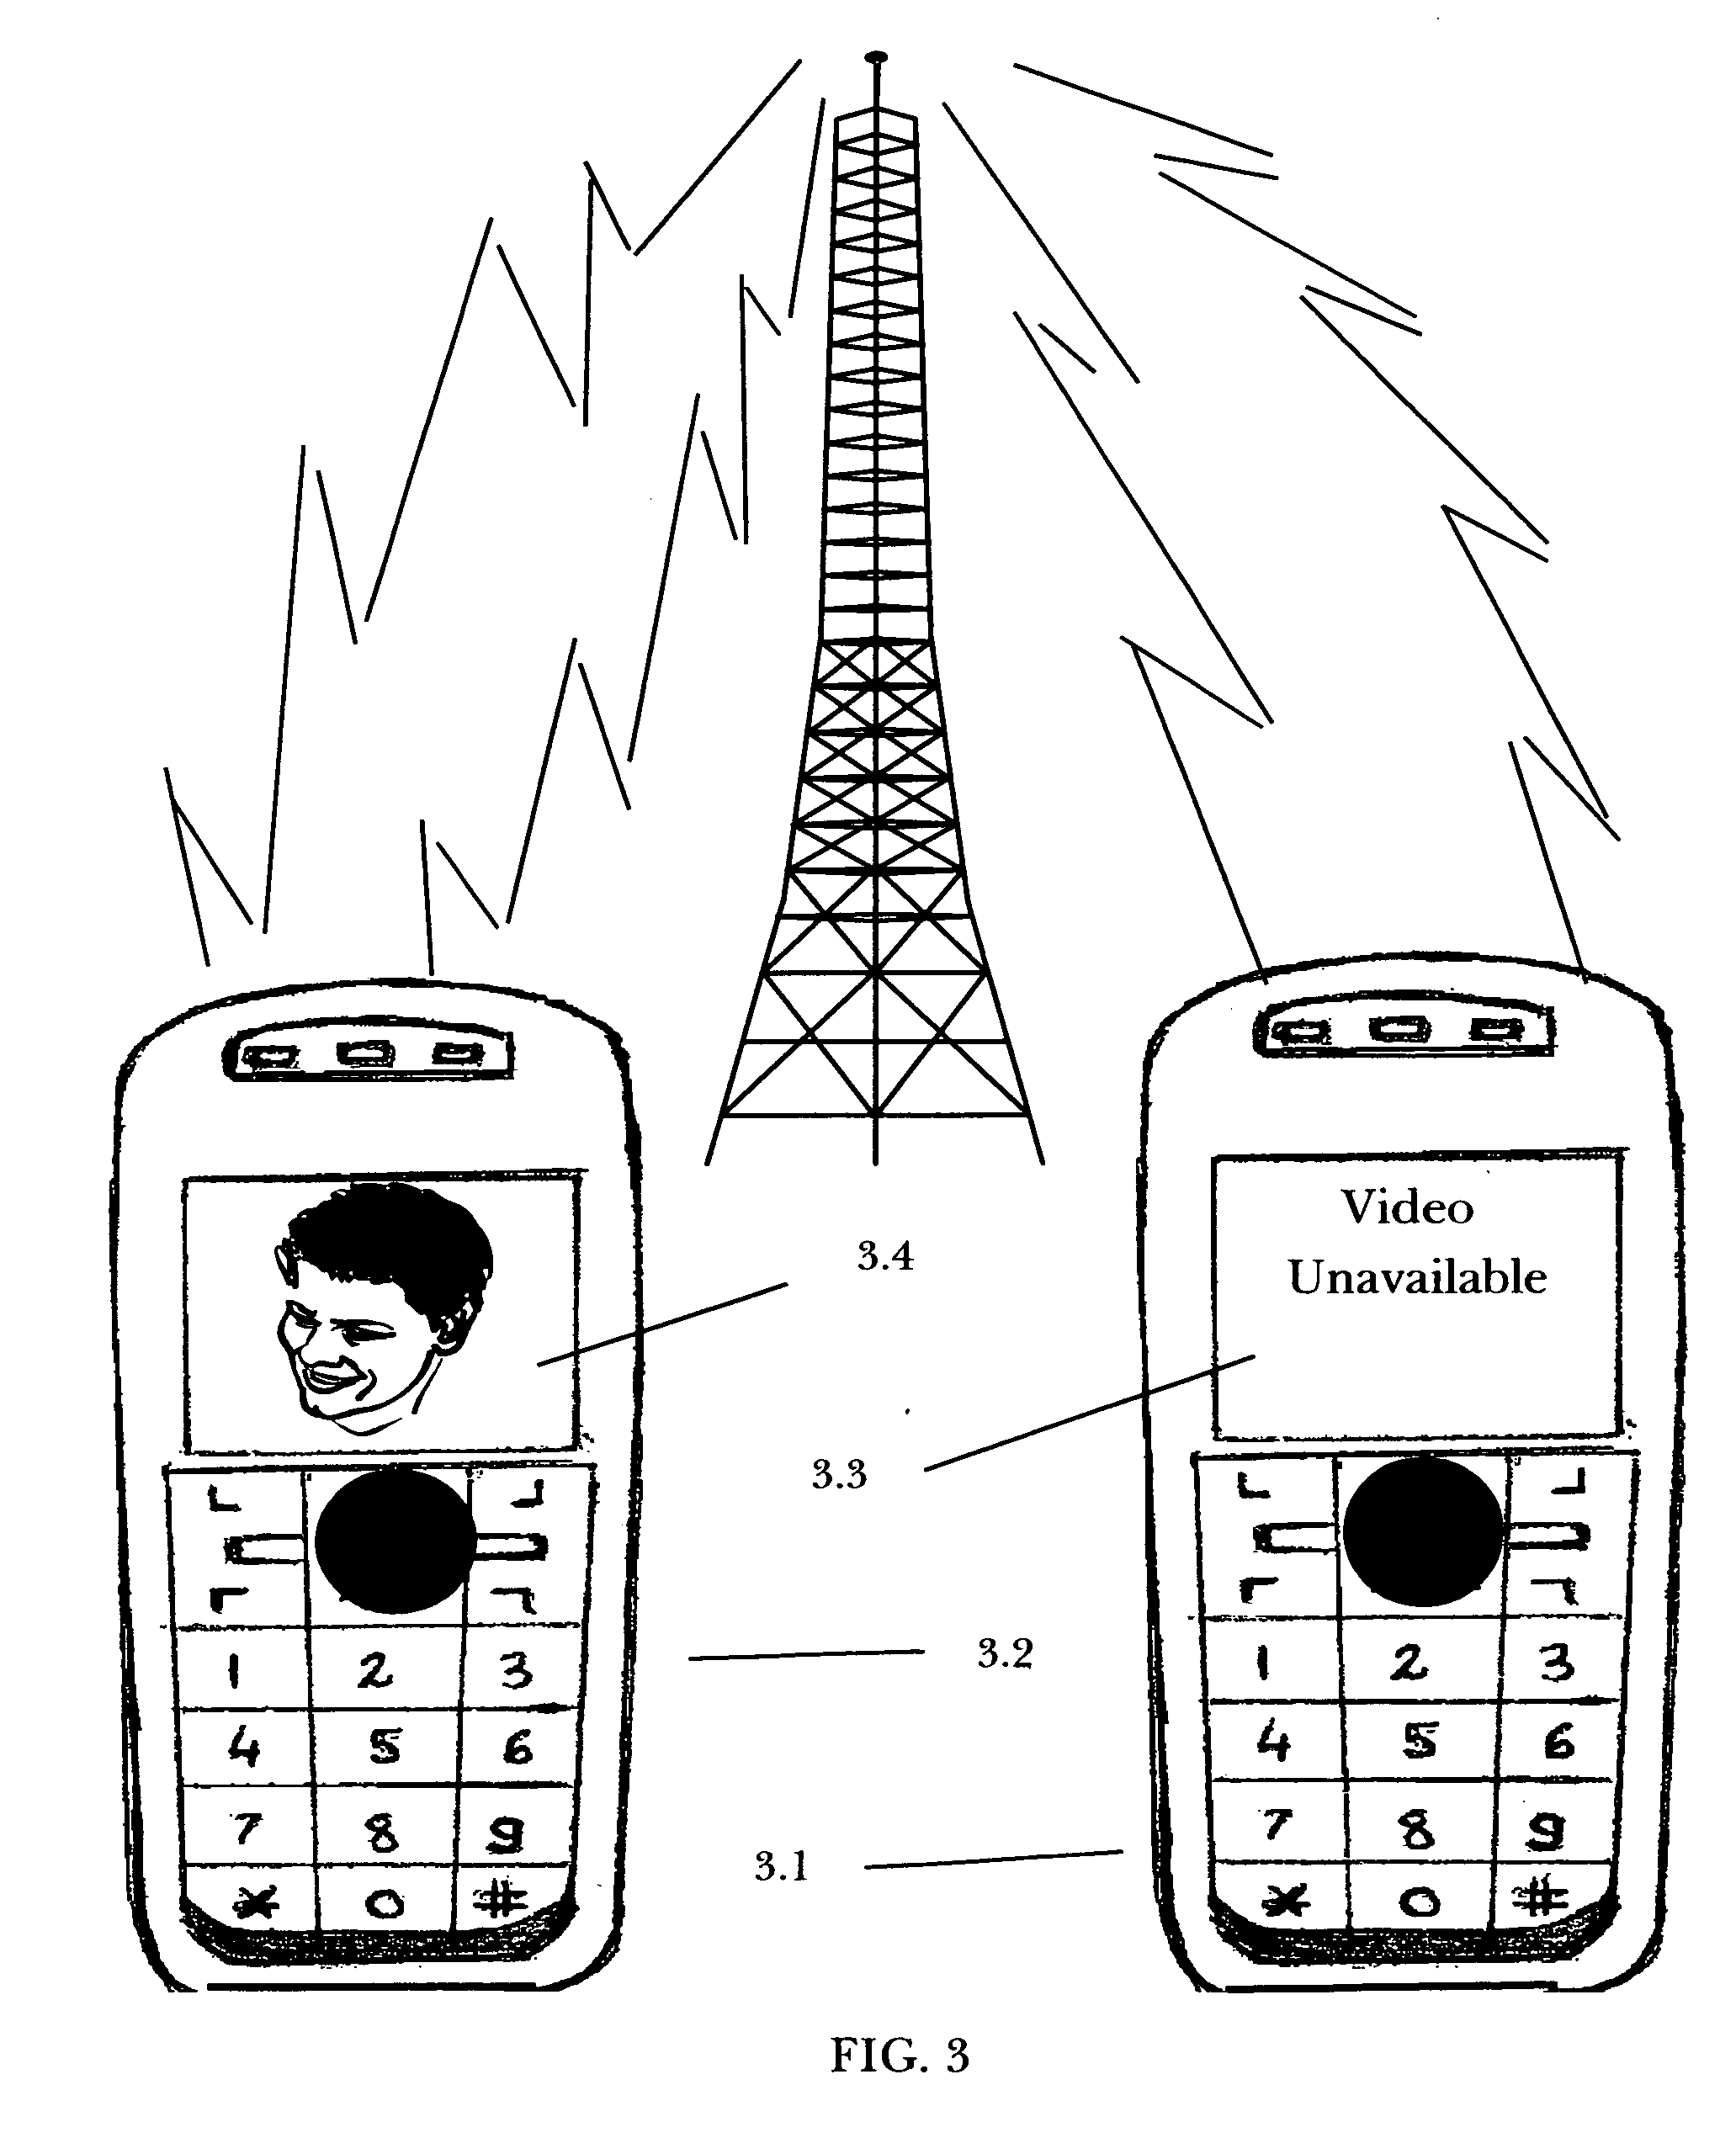 Exchange of voice and video between two cellular or wireless telephones